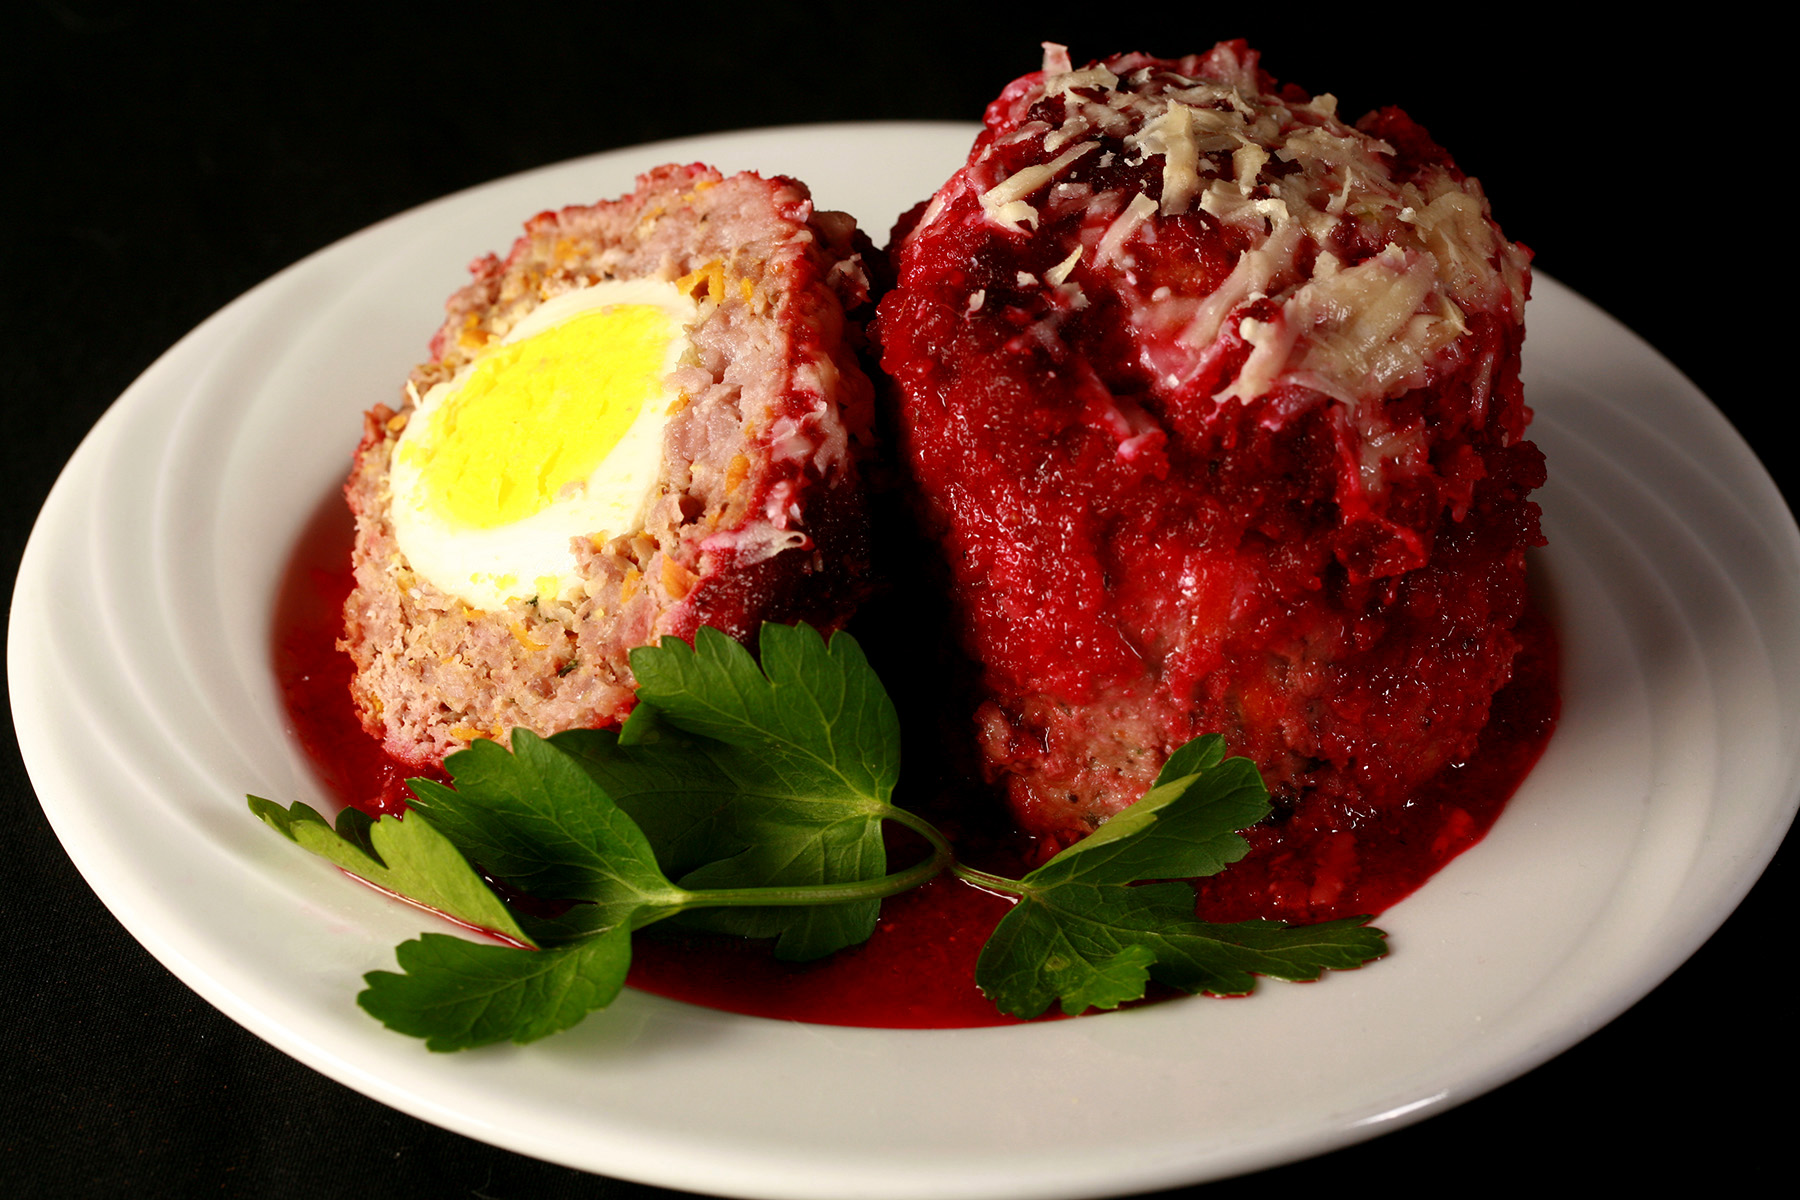 An individual scotch egg meatloaf on a white plate, with a half meatloaf next to it. The half serving shows the hard boiled egg surrounded by meatloaf.